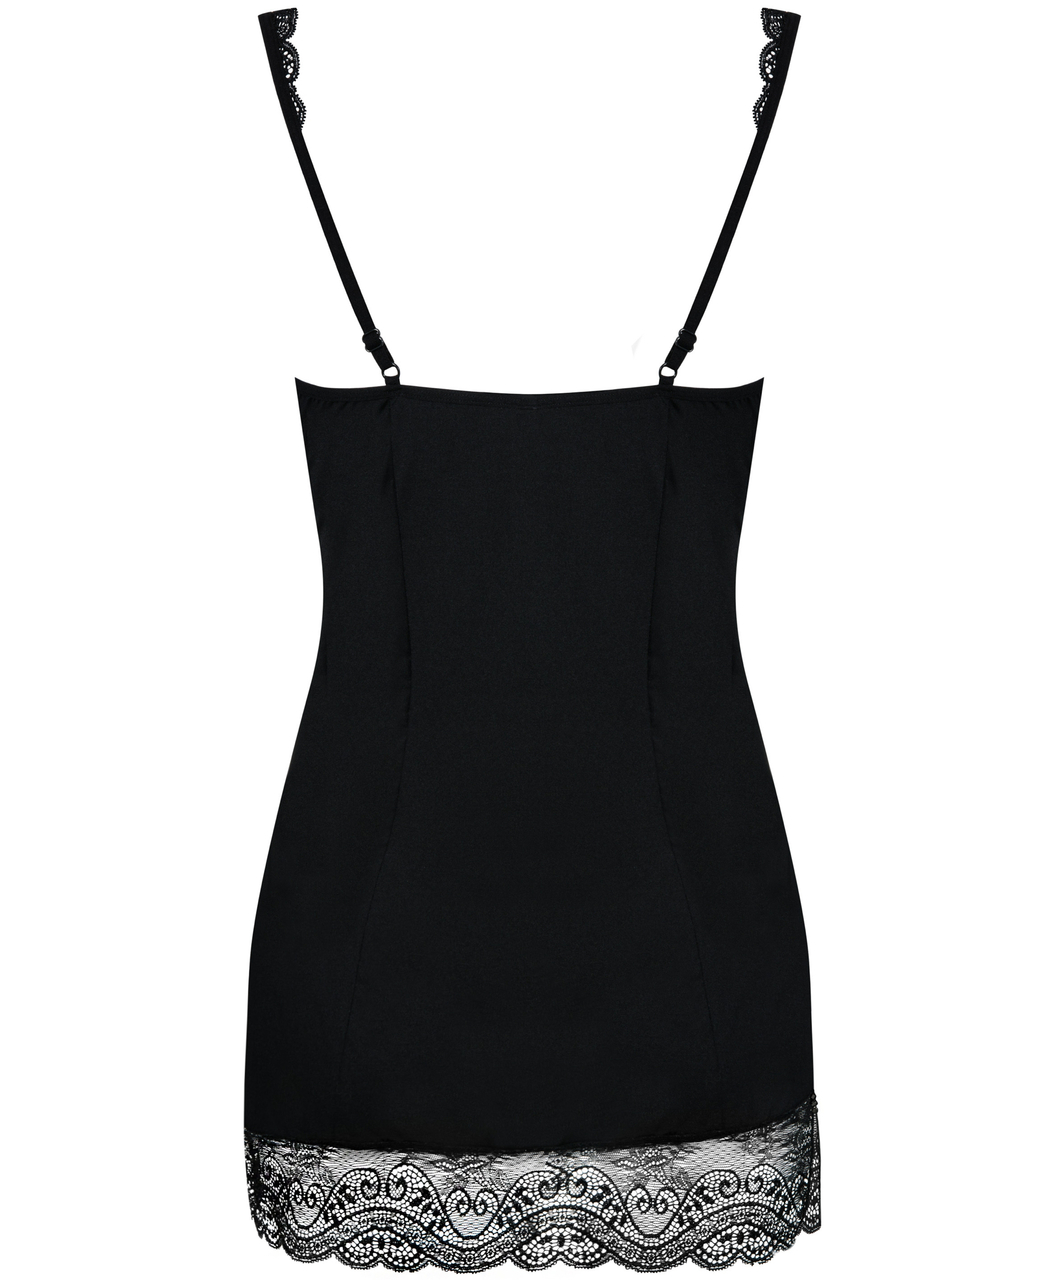 Obsessive Miamor black chemise with lace and black rhinestones